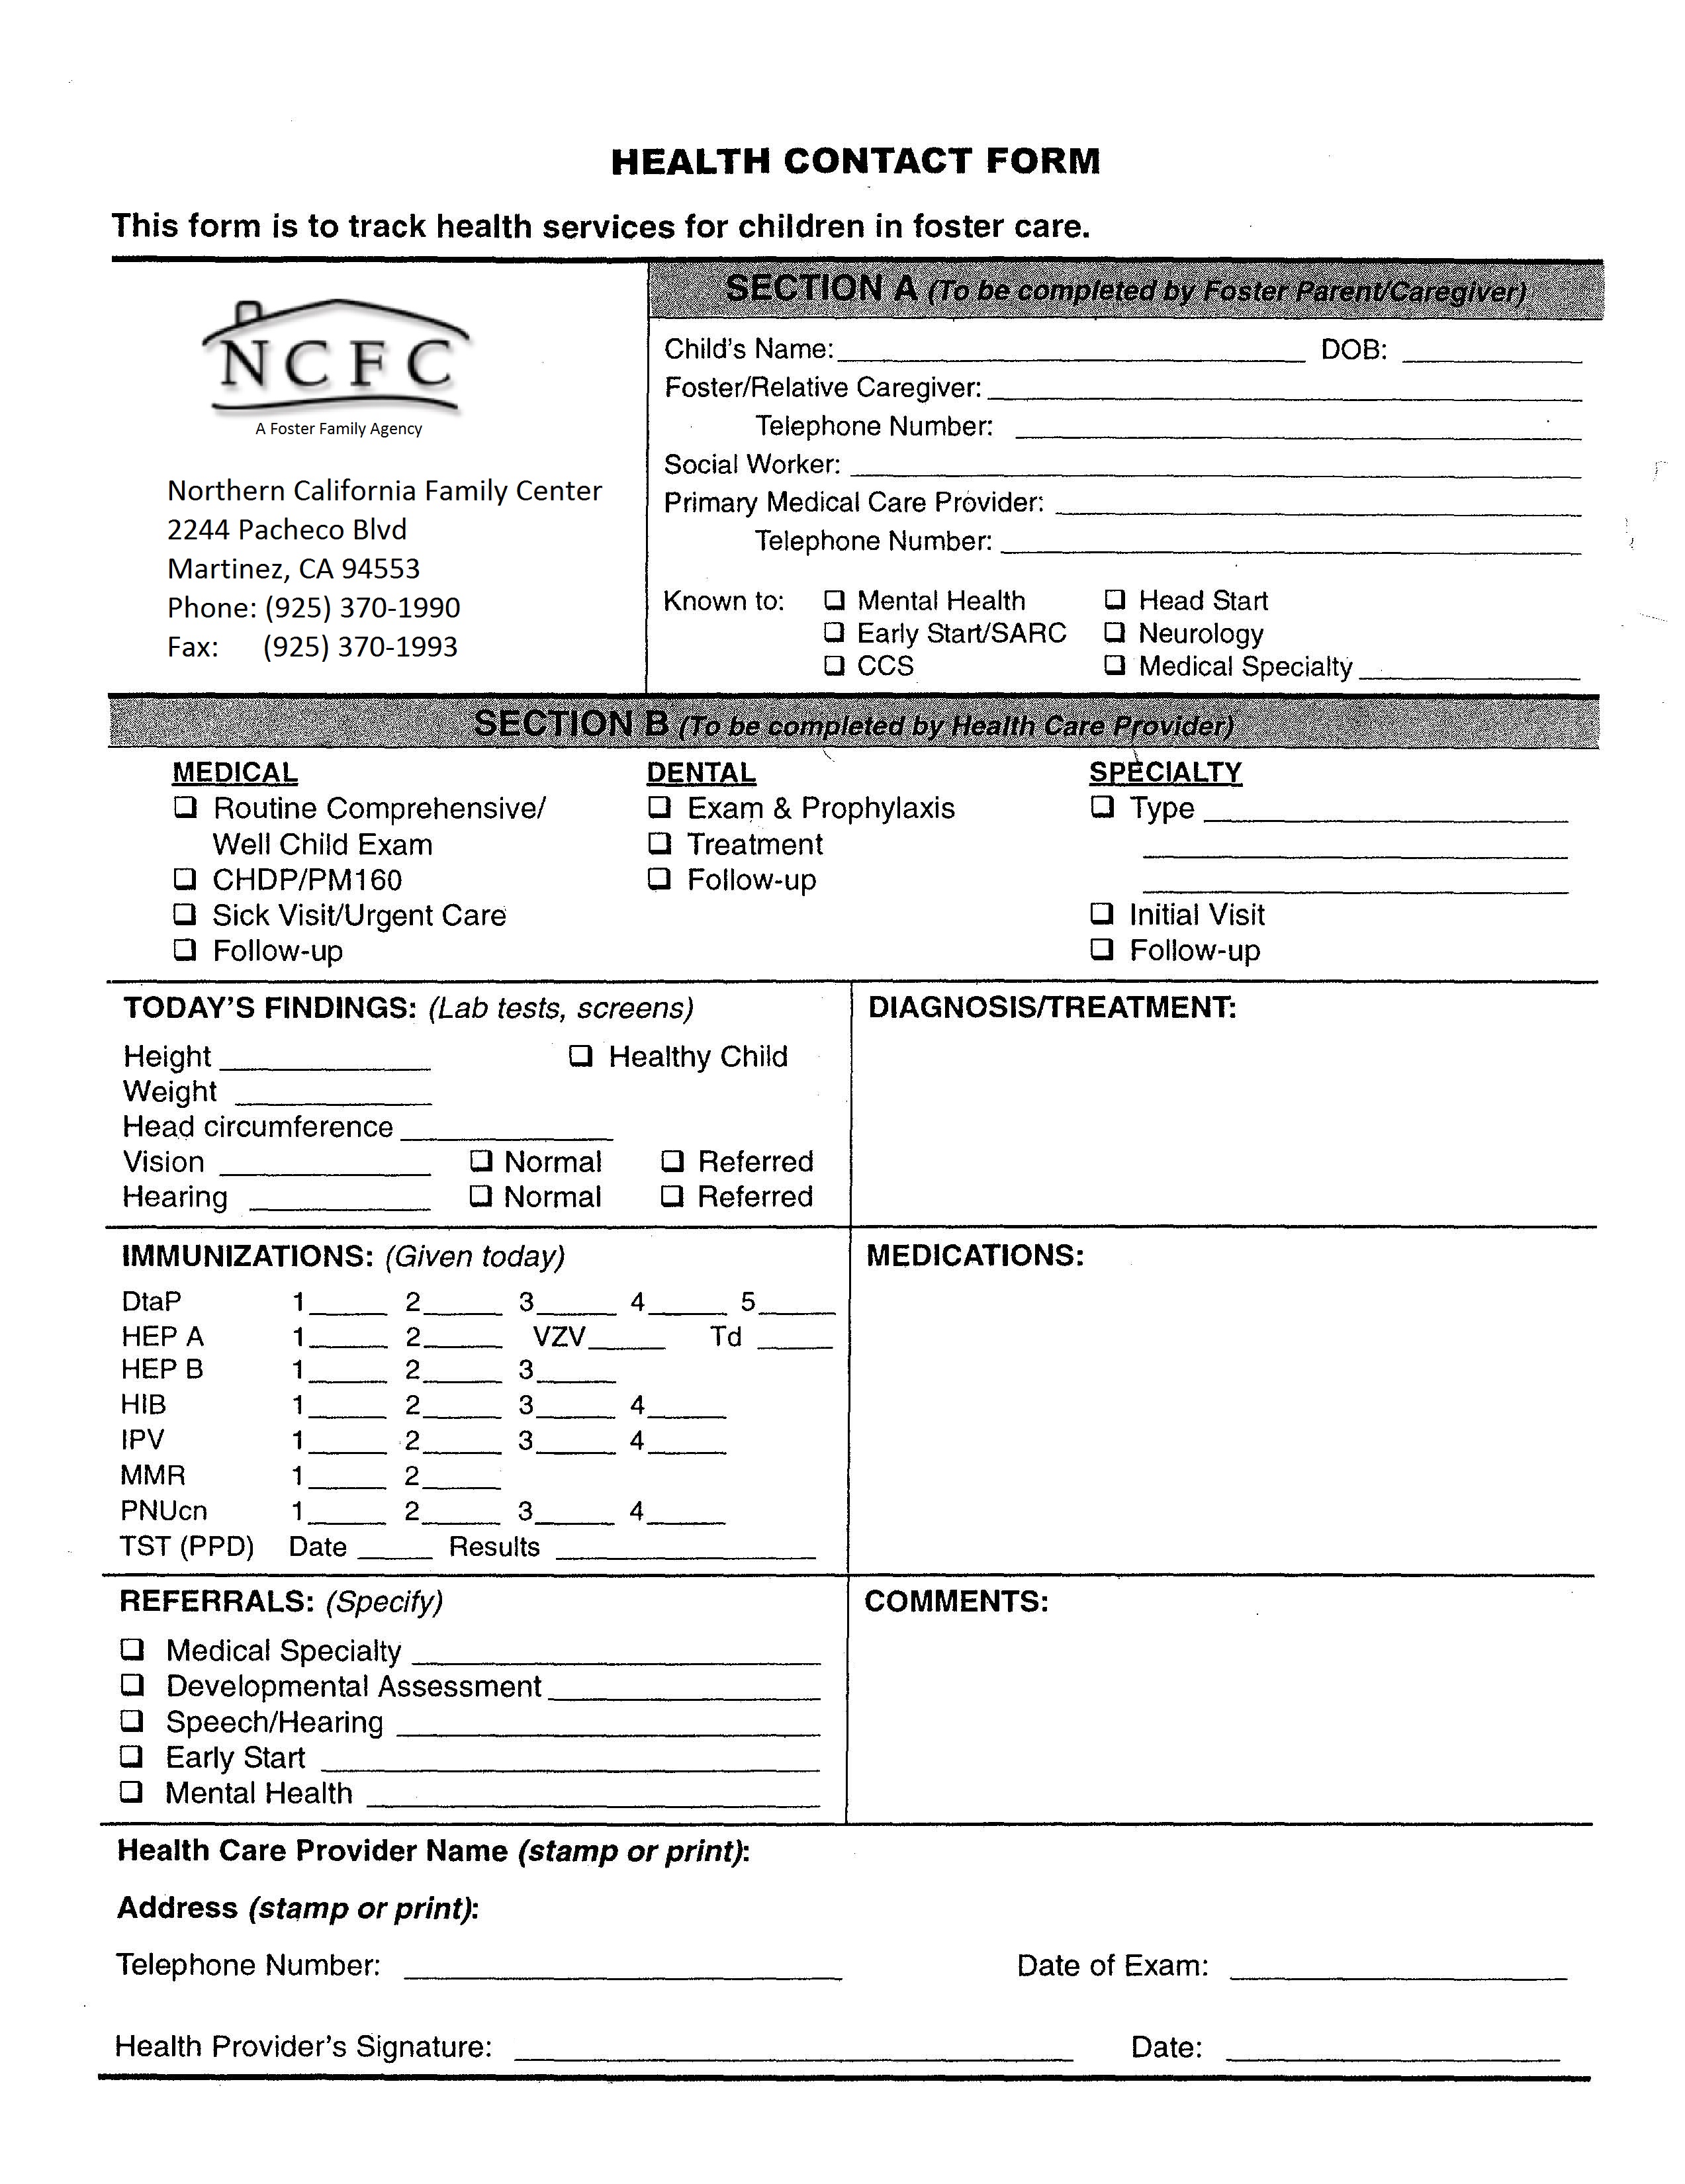 Forms and Applications | Northern California Family Center